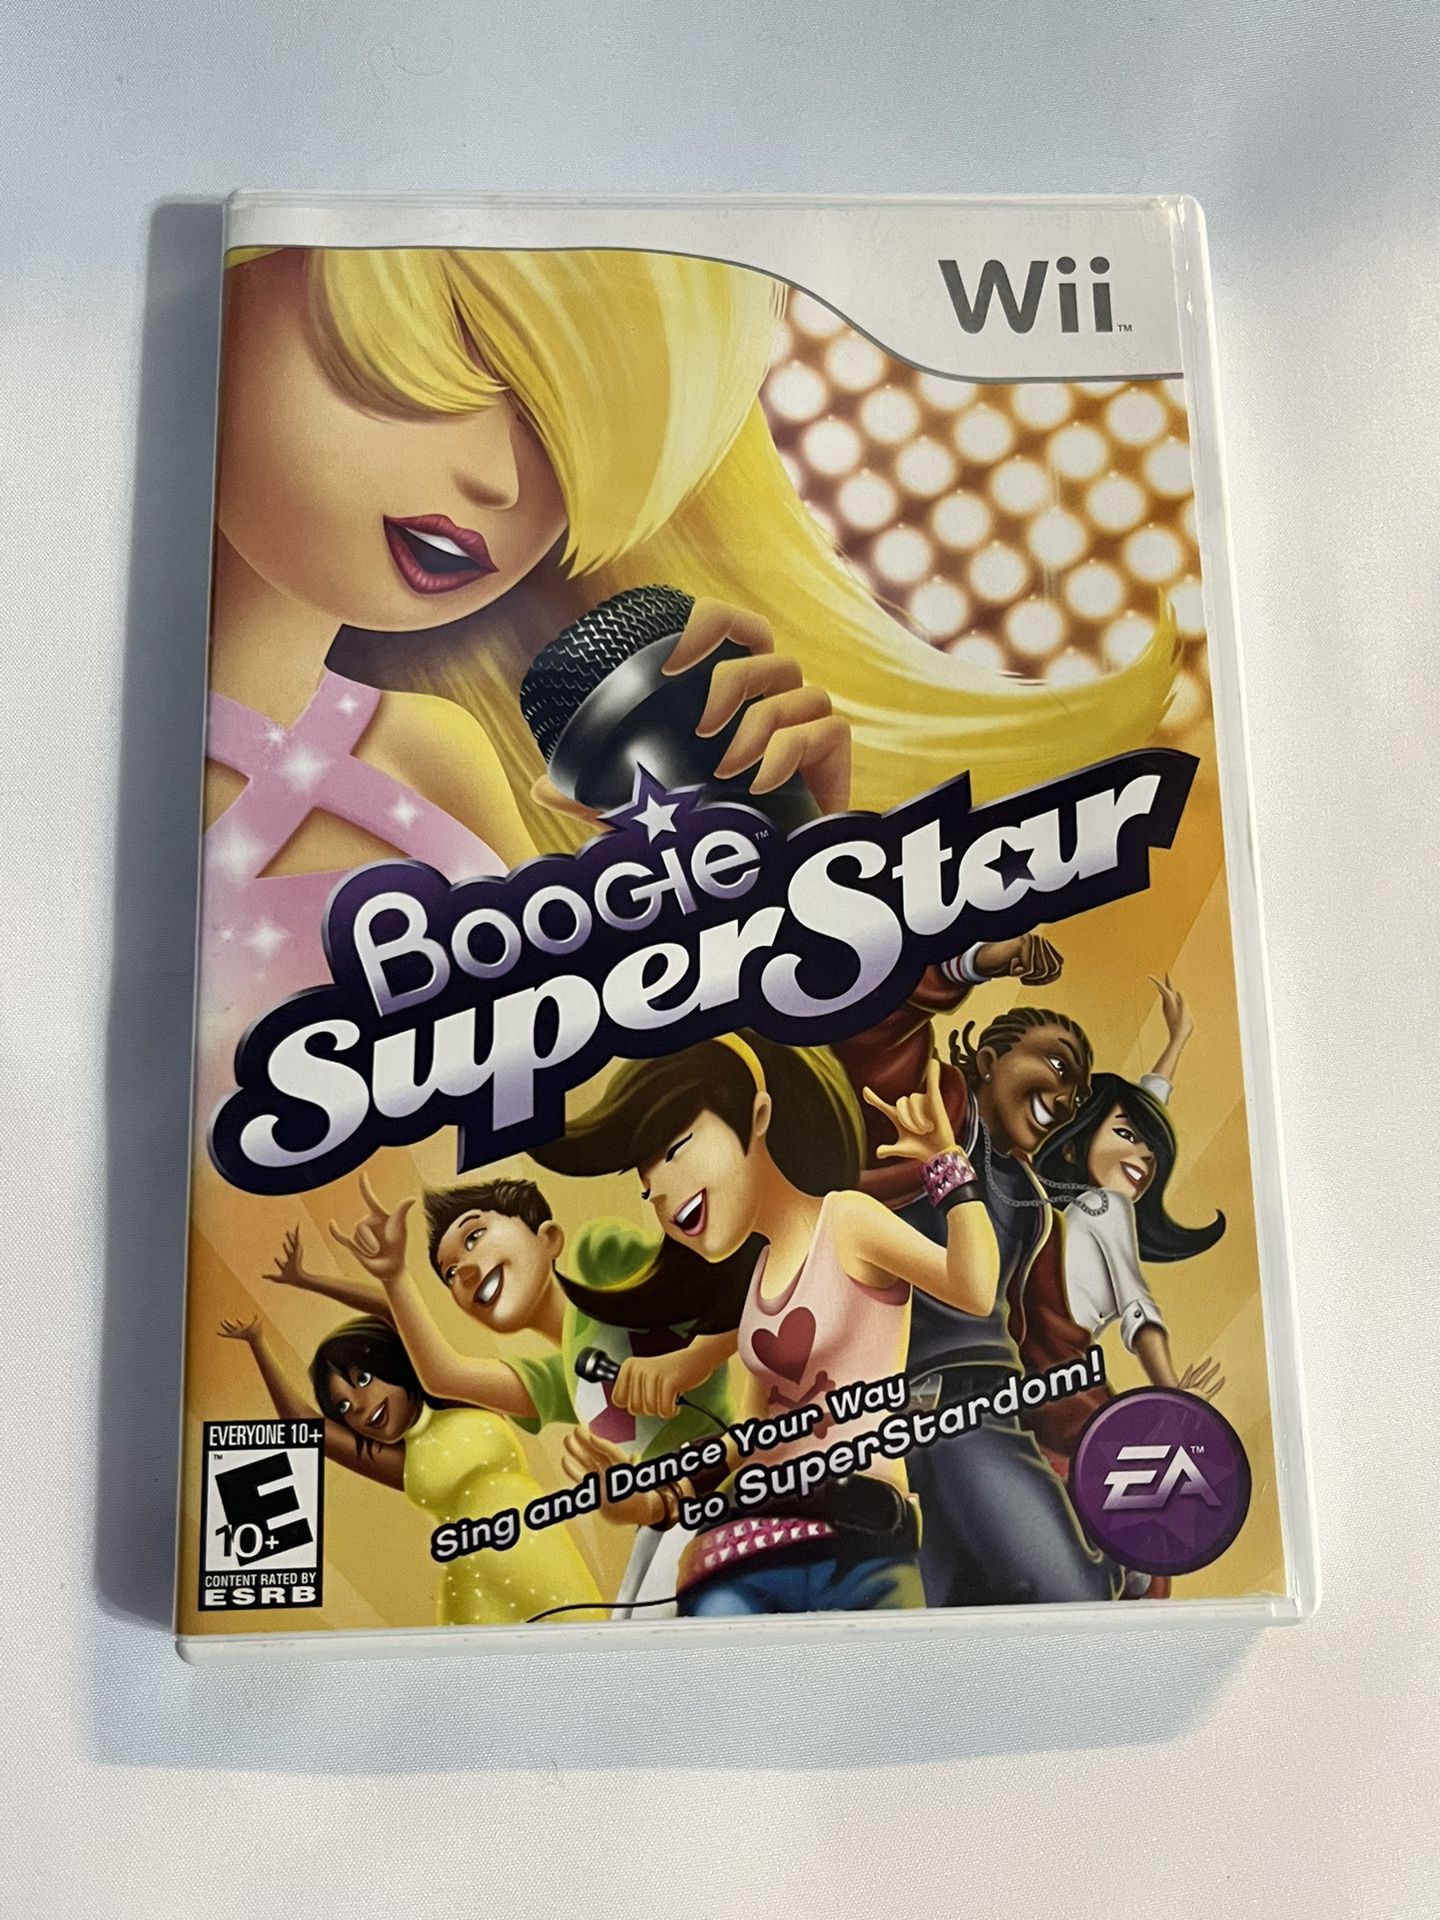 Boogie Super Star - Nintendo Wii - Complete with Manual and Poster Tested